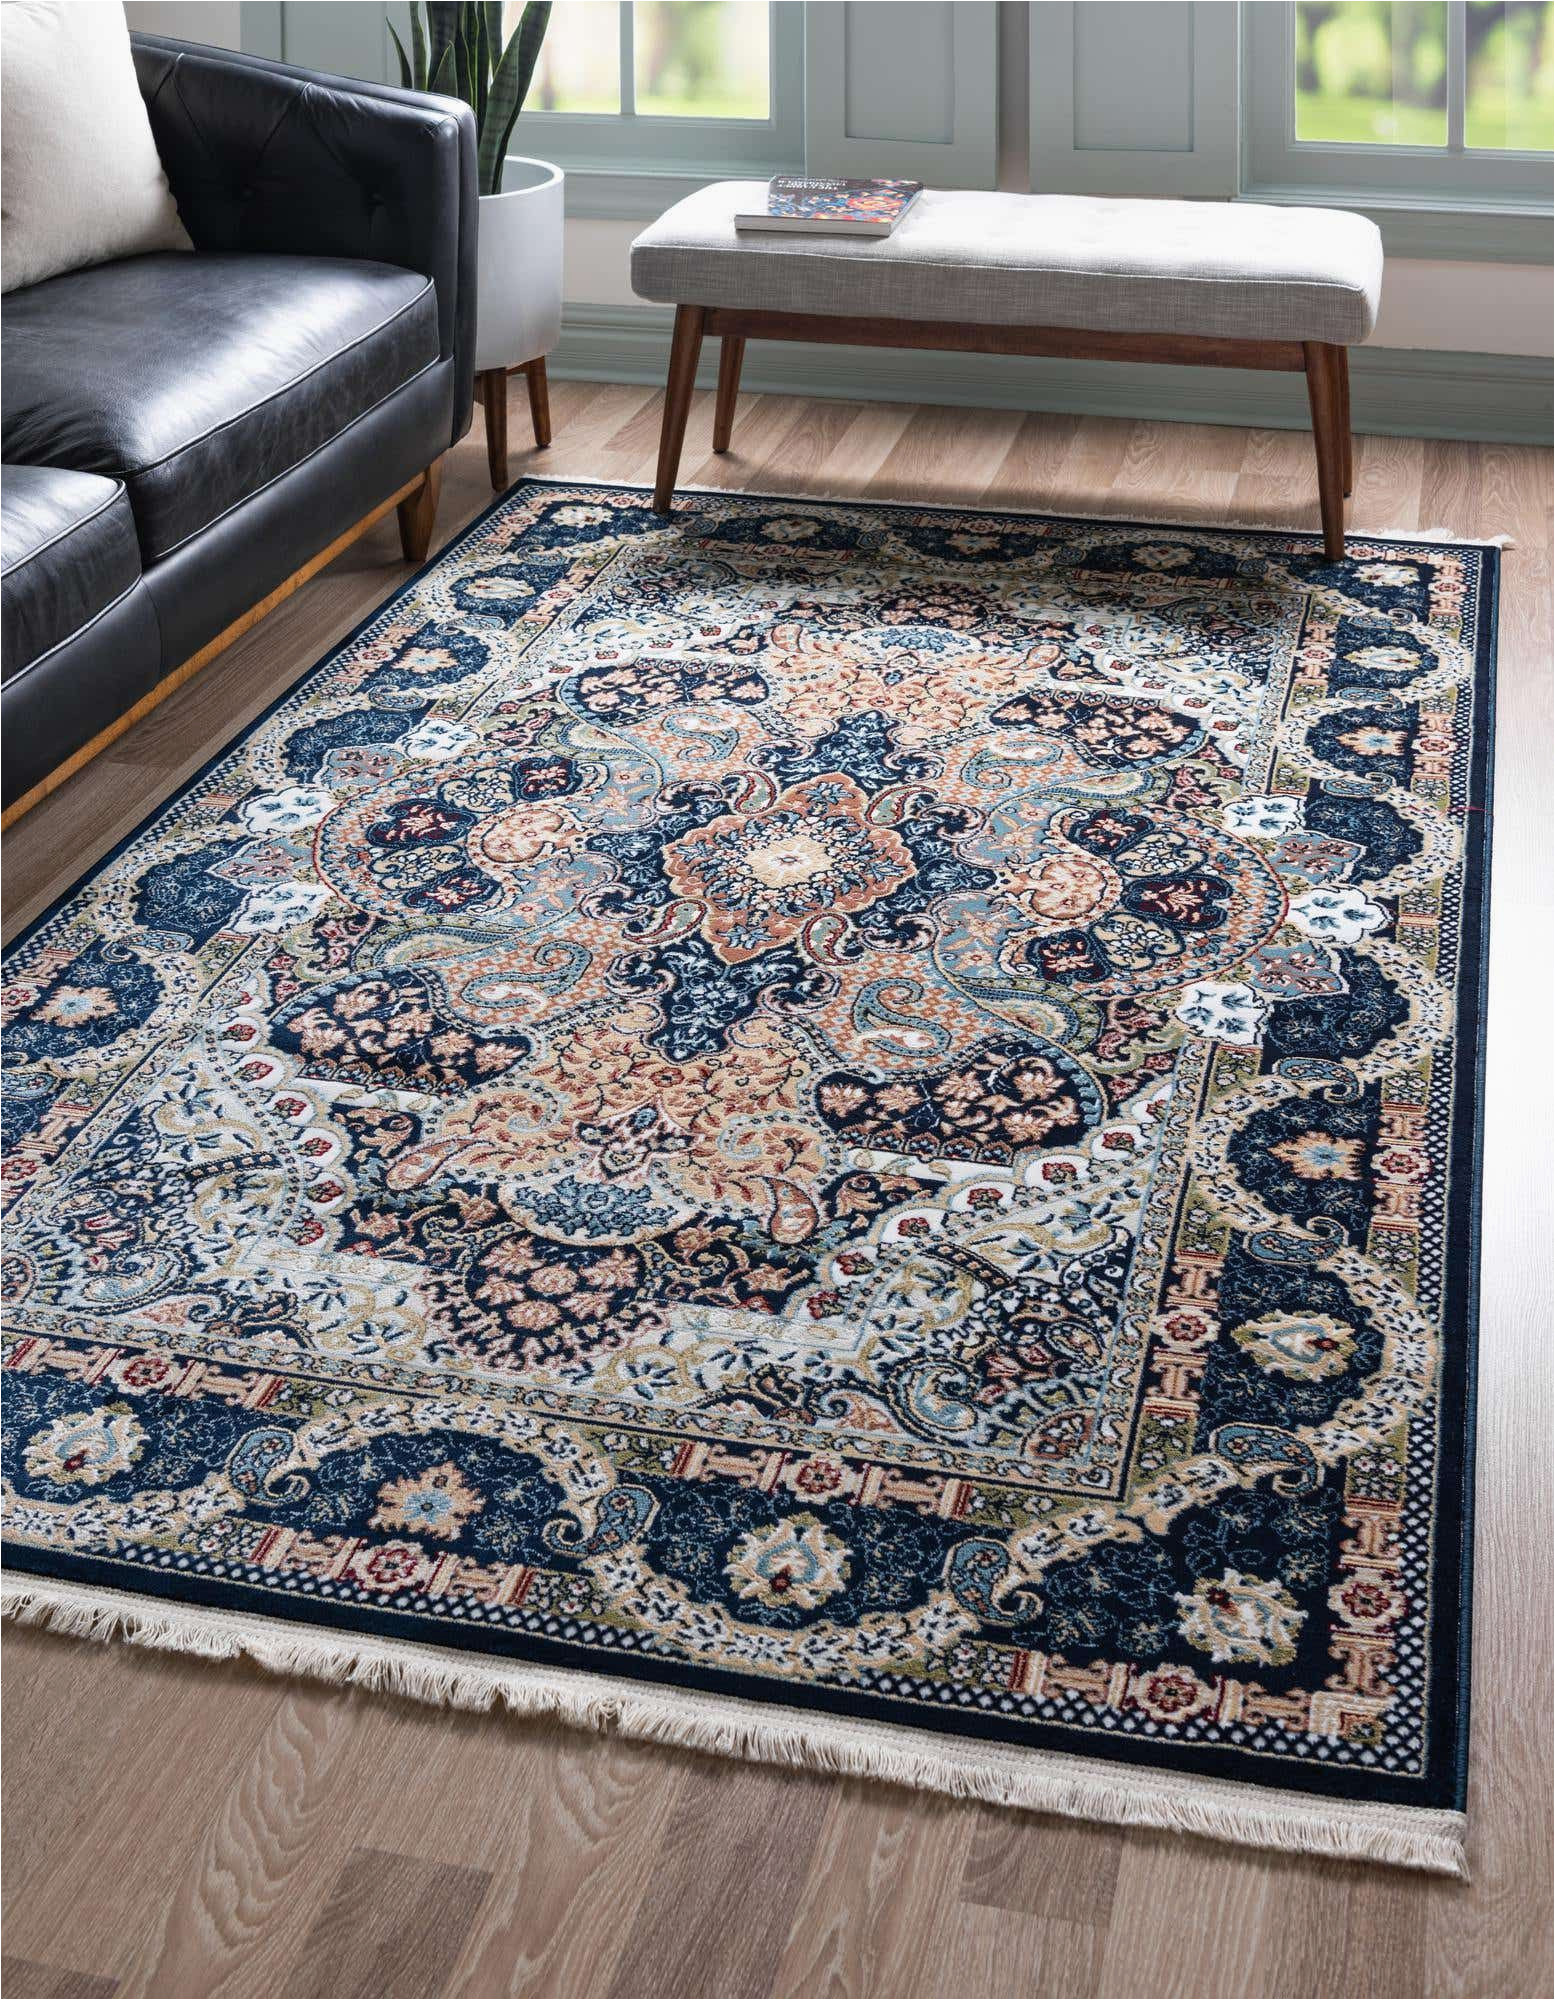 8×10 Blue and Gray Rug I Also Loved their Blue 8×10 Rabia area Rug 6271536rt